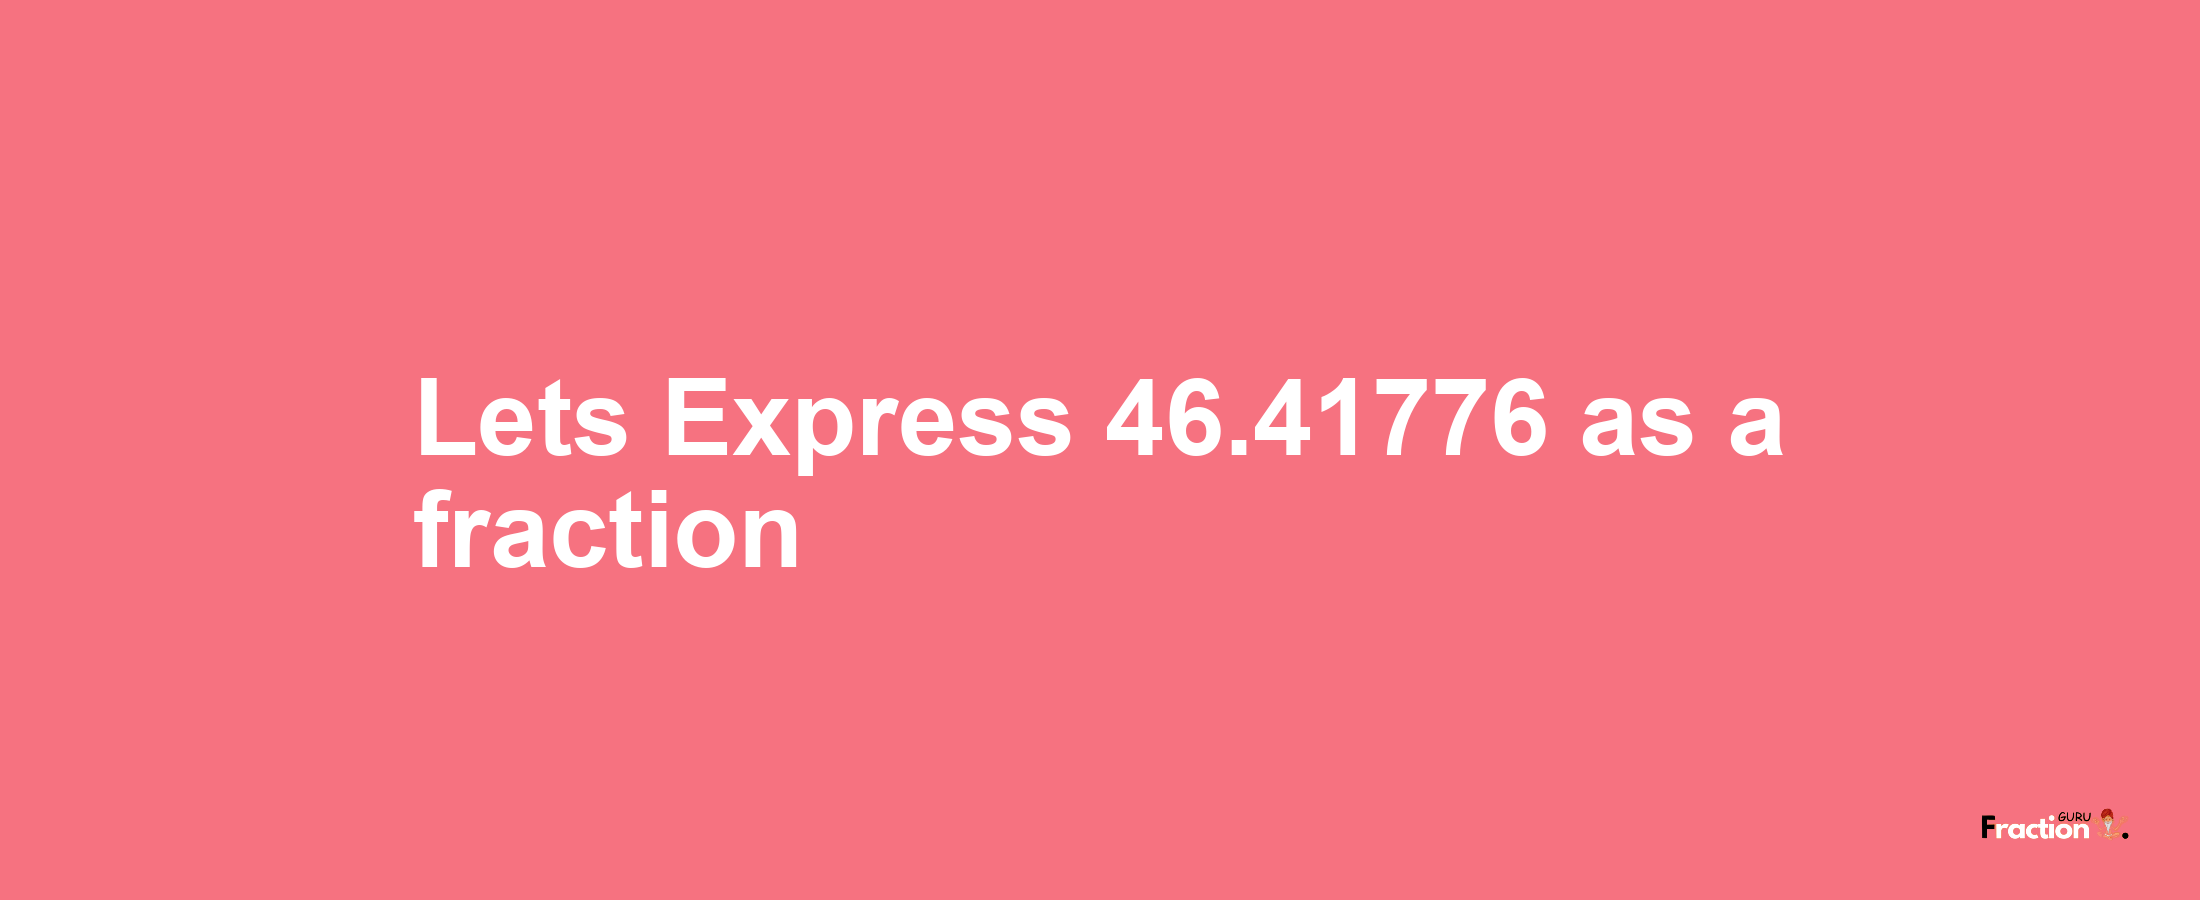 Lets Express 46.41776 as afraction